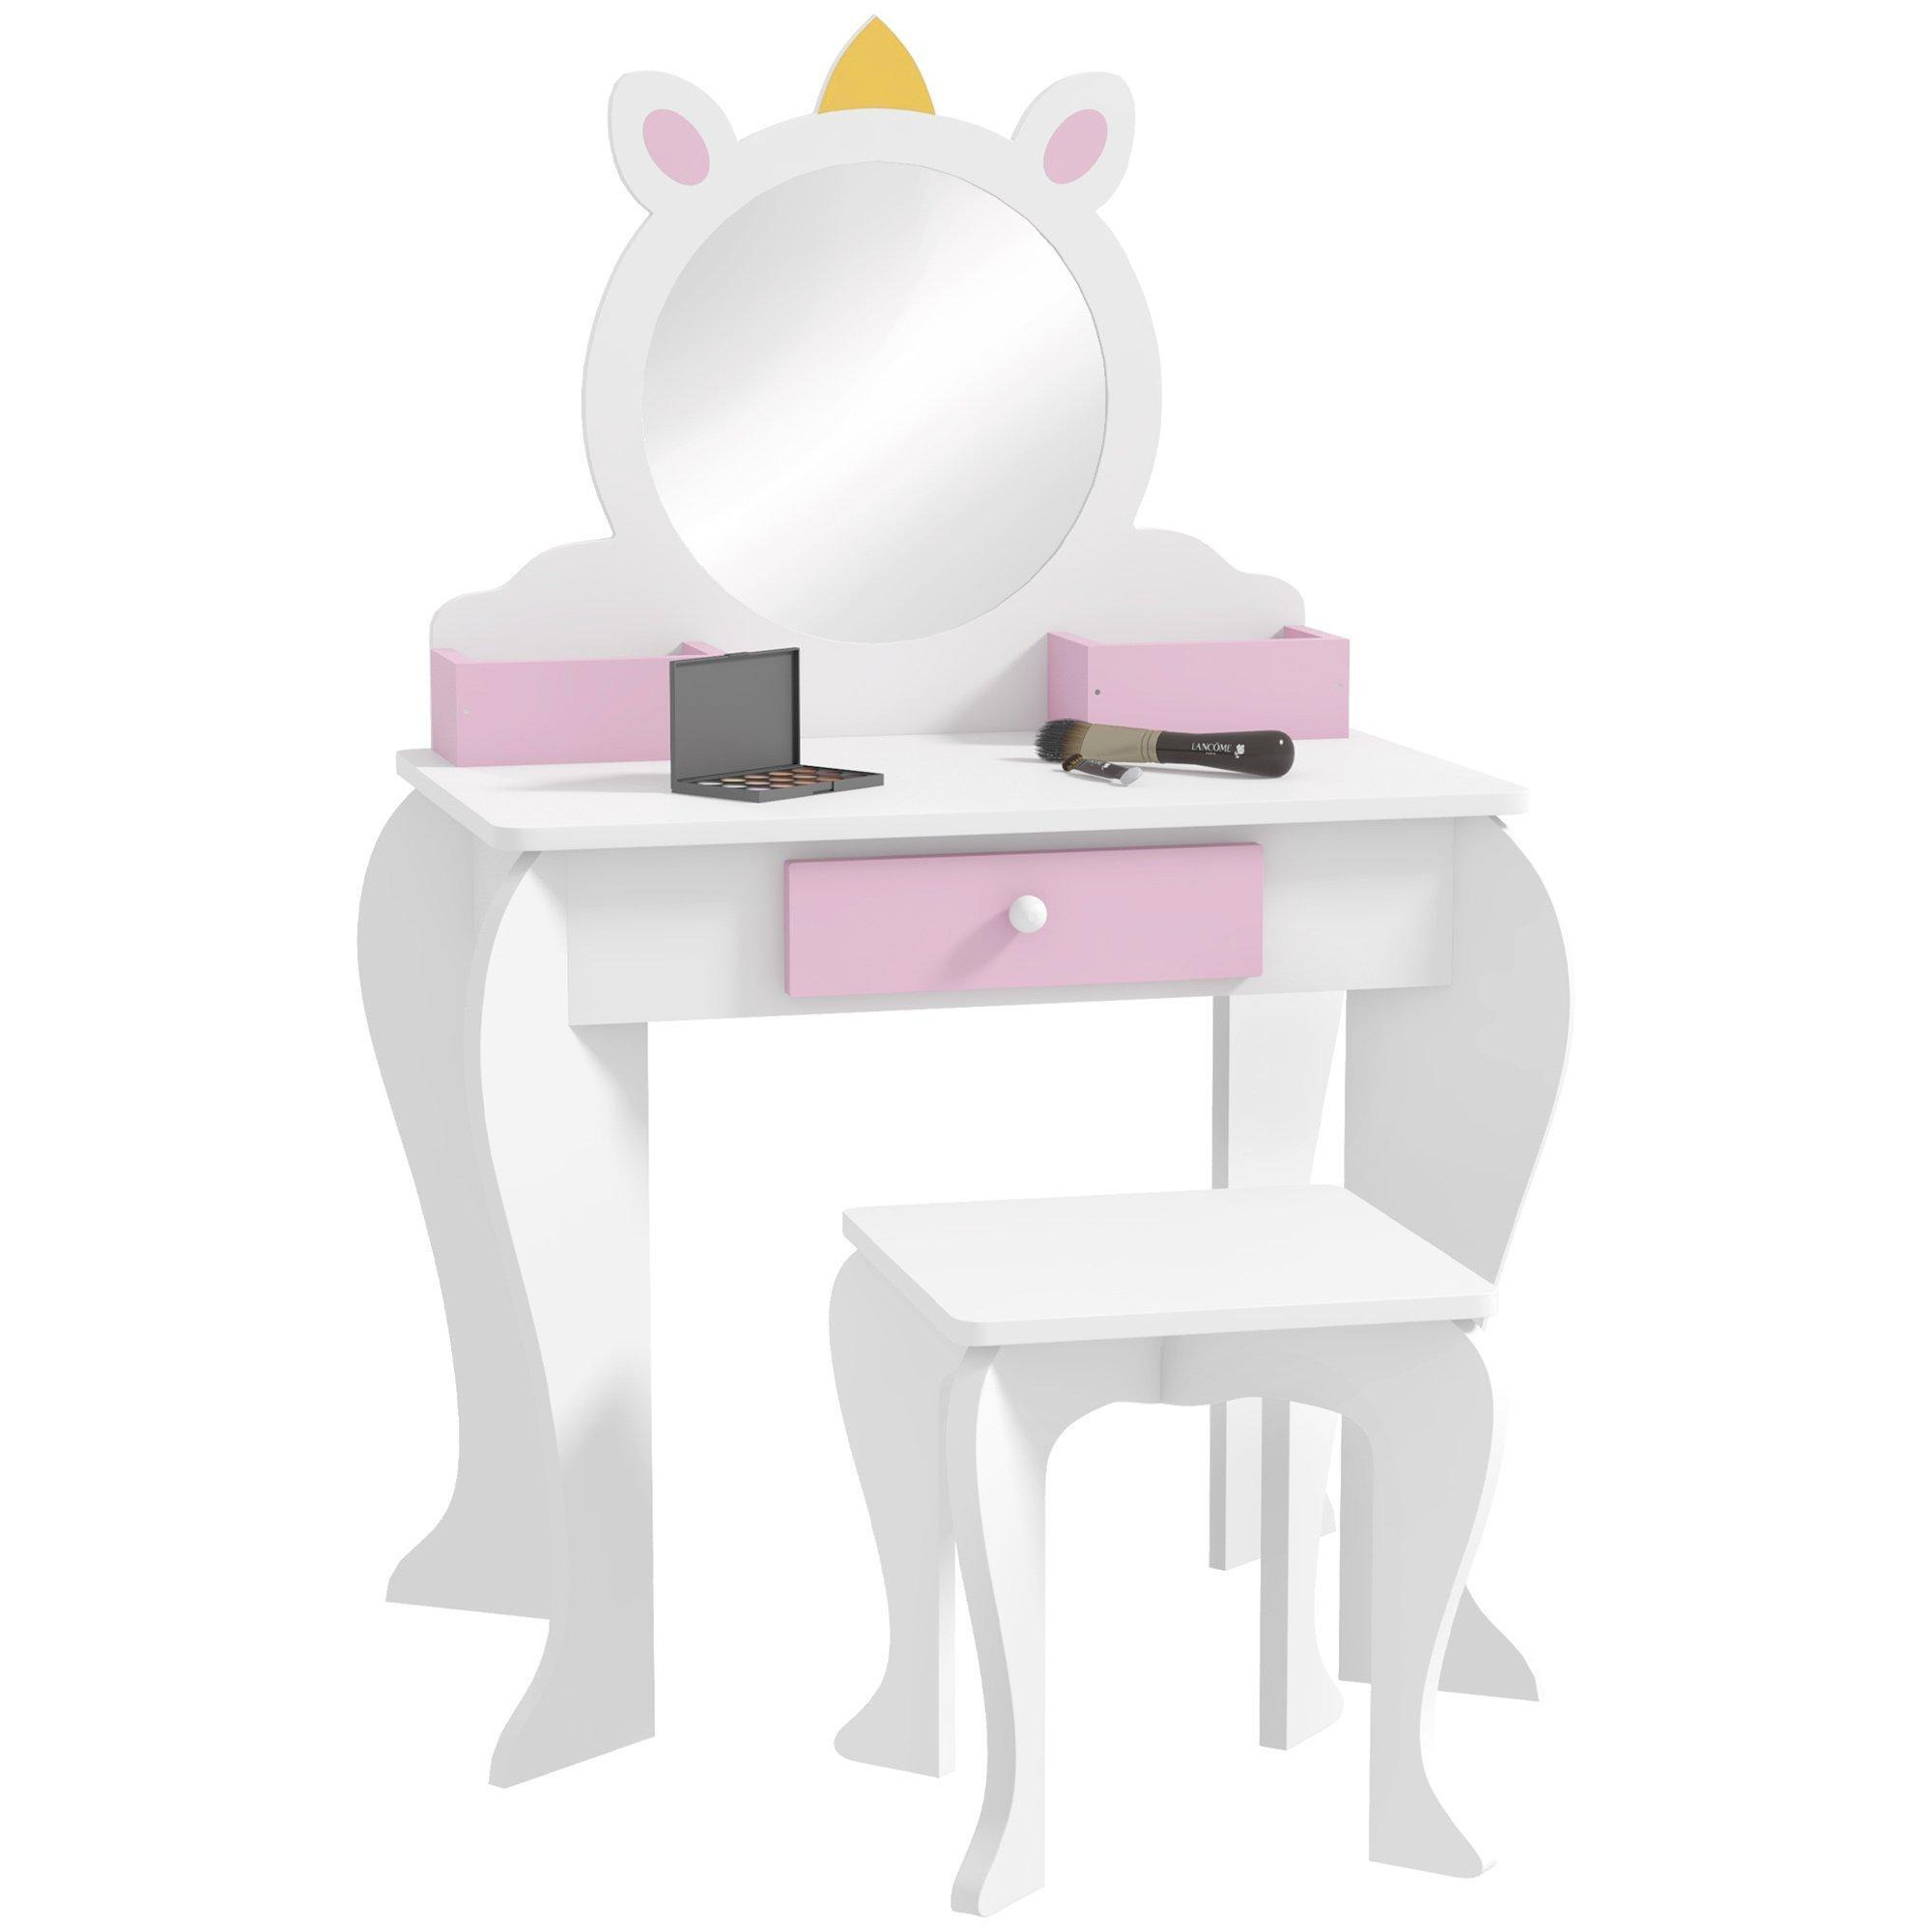 Kids Dressing Table with Mirror and Stool, Unicorn Design, for Ages 3-6 Years - image 1